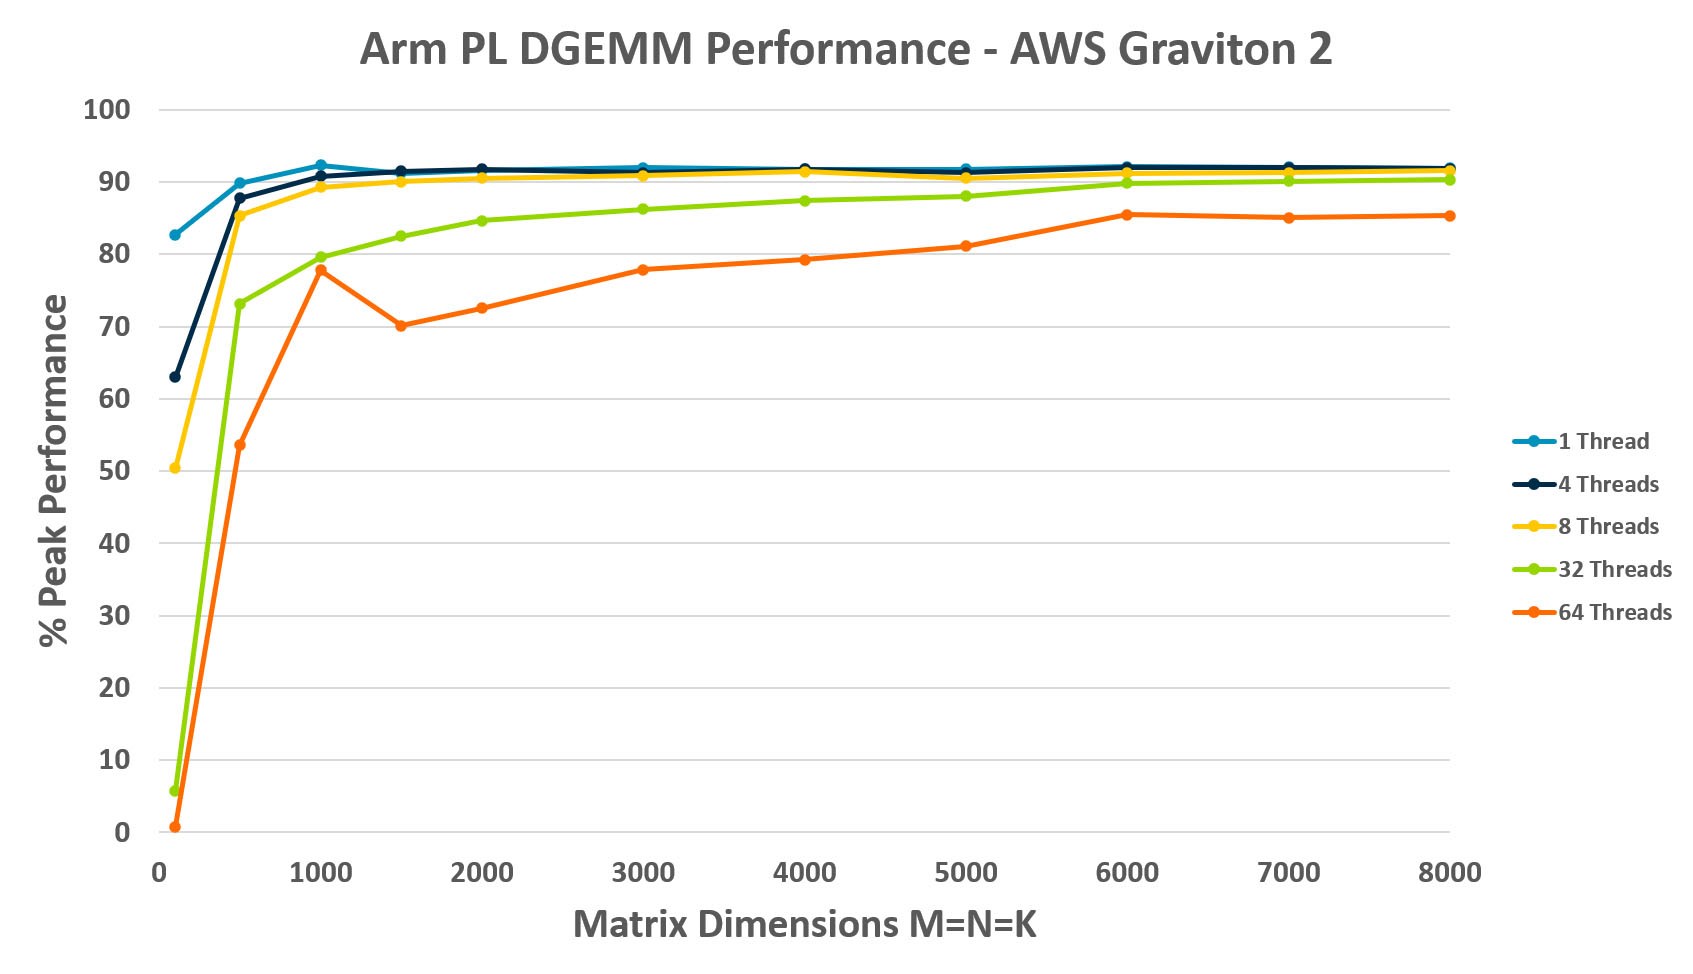 This is a graph showing the Arm PL DGEMM